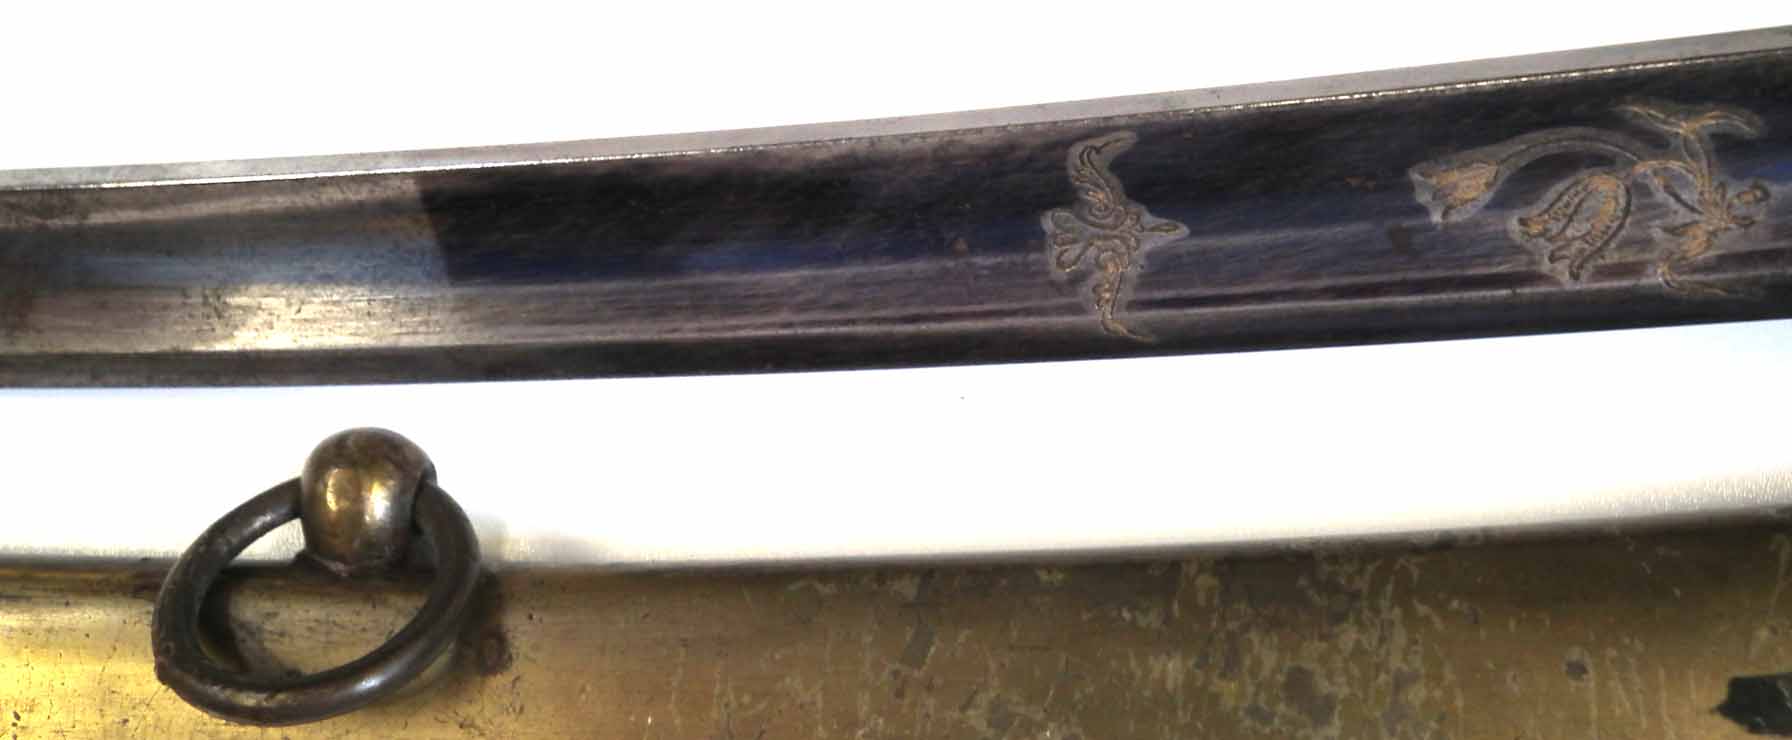 1822 type Cavalry sabre by Weyersberg Solingen, with etched blue and gilt blade, brass guard and - Image 10 of 14